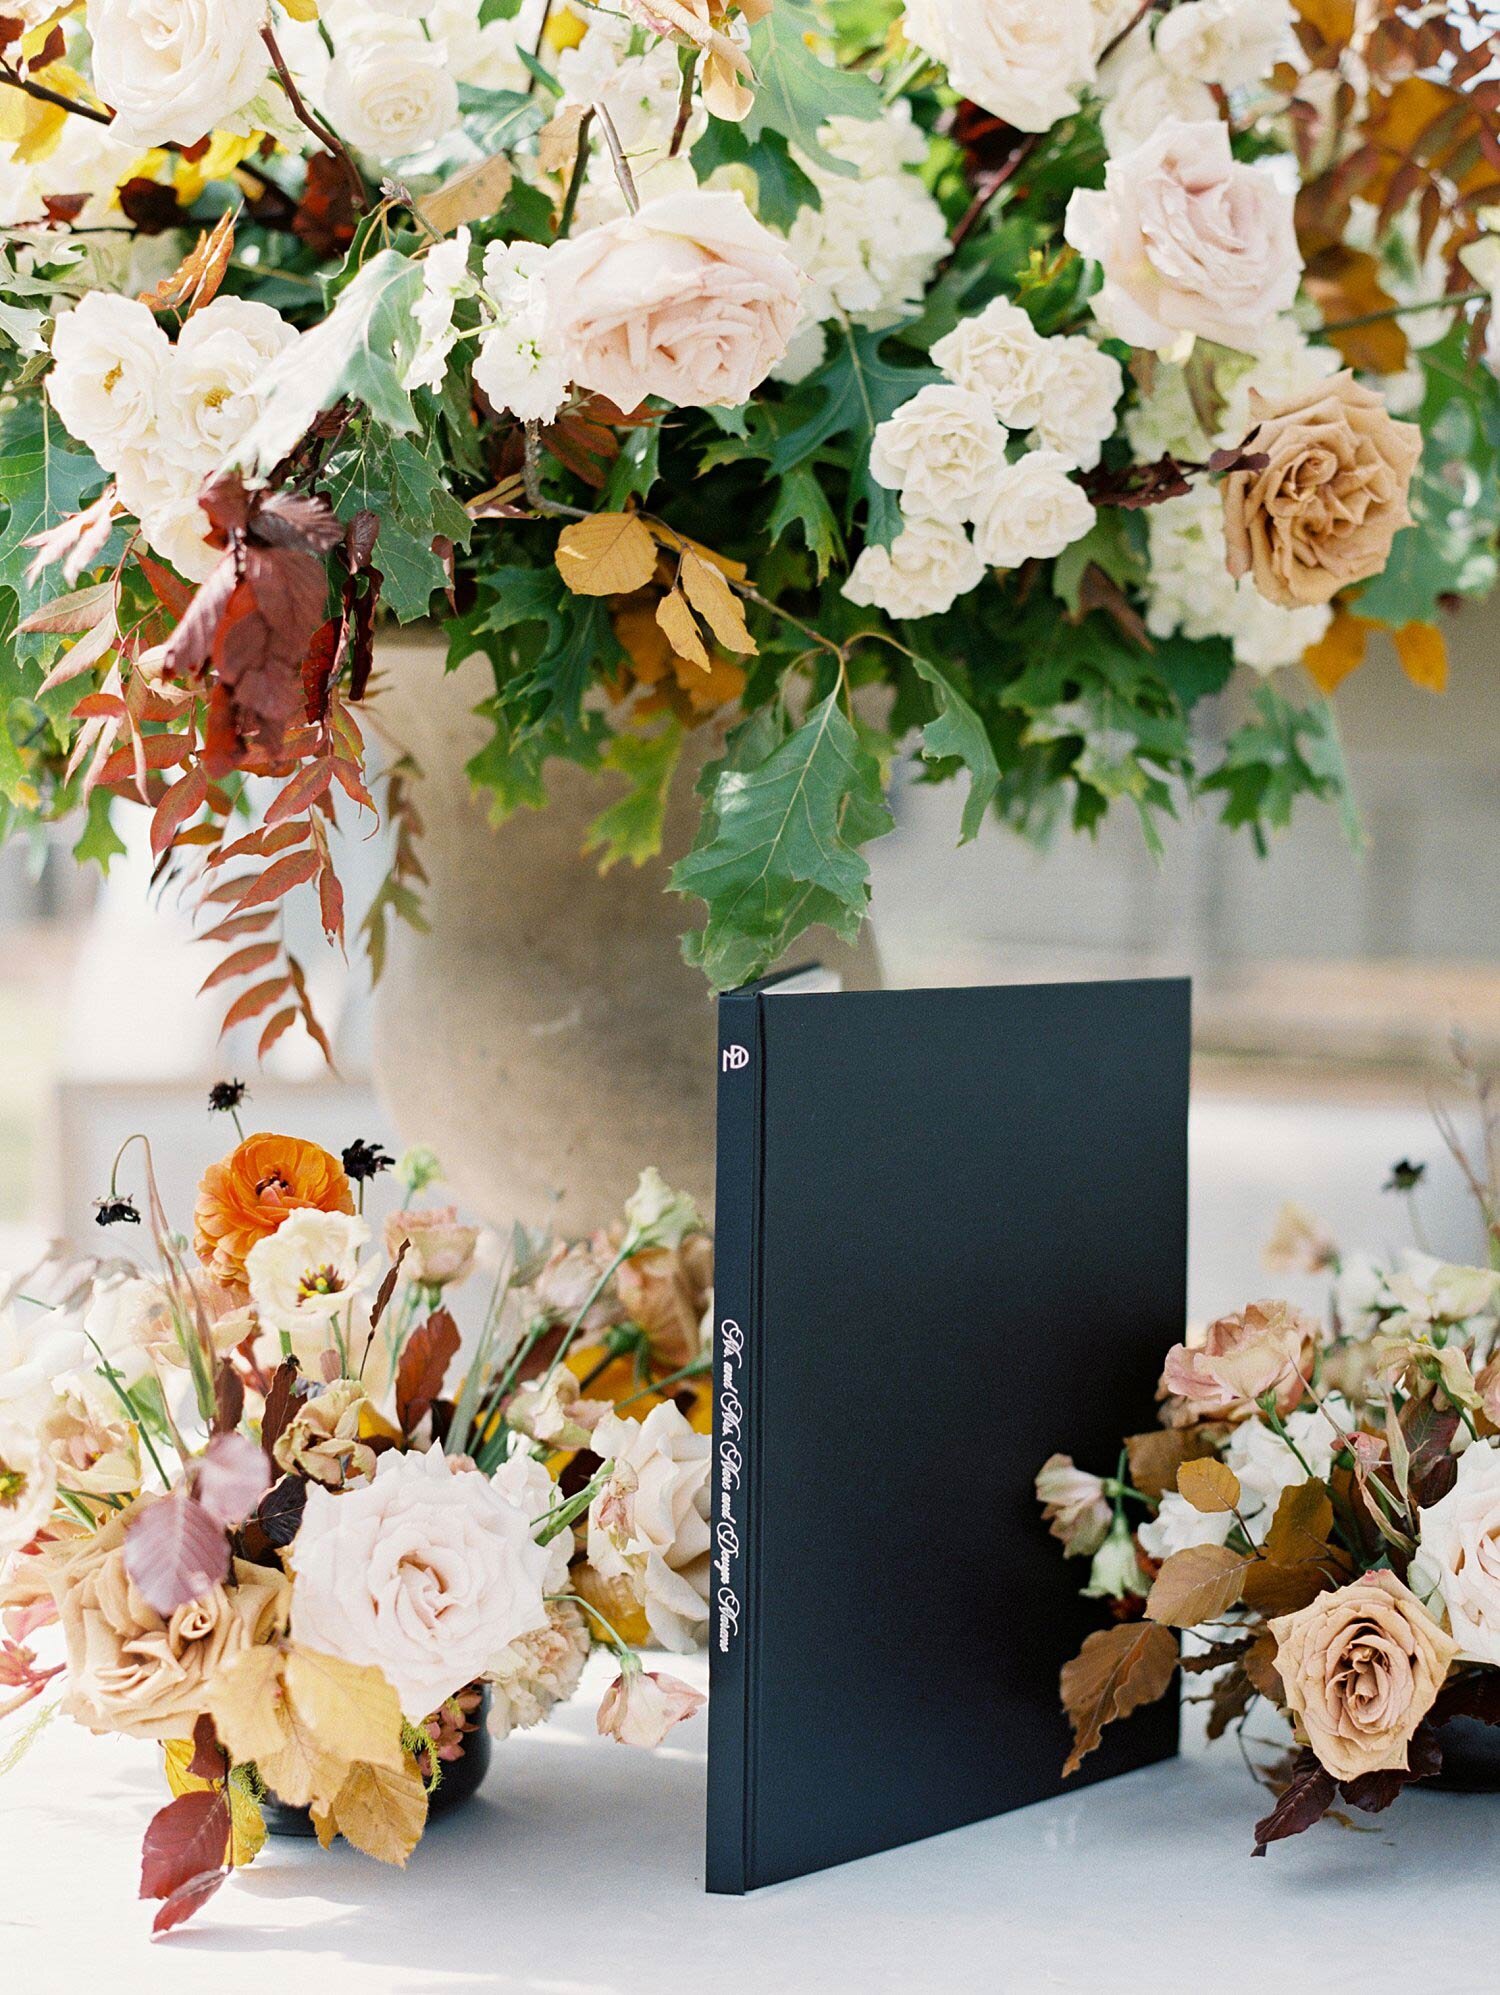 Black guest book with white text and fall flowers in the background